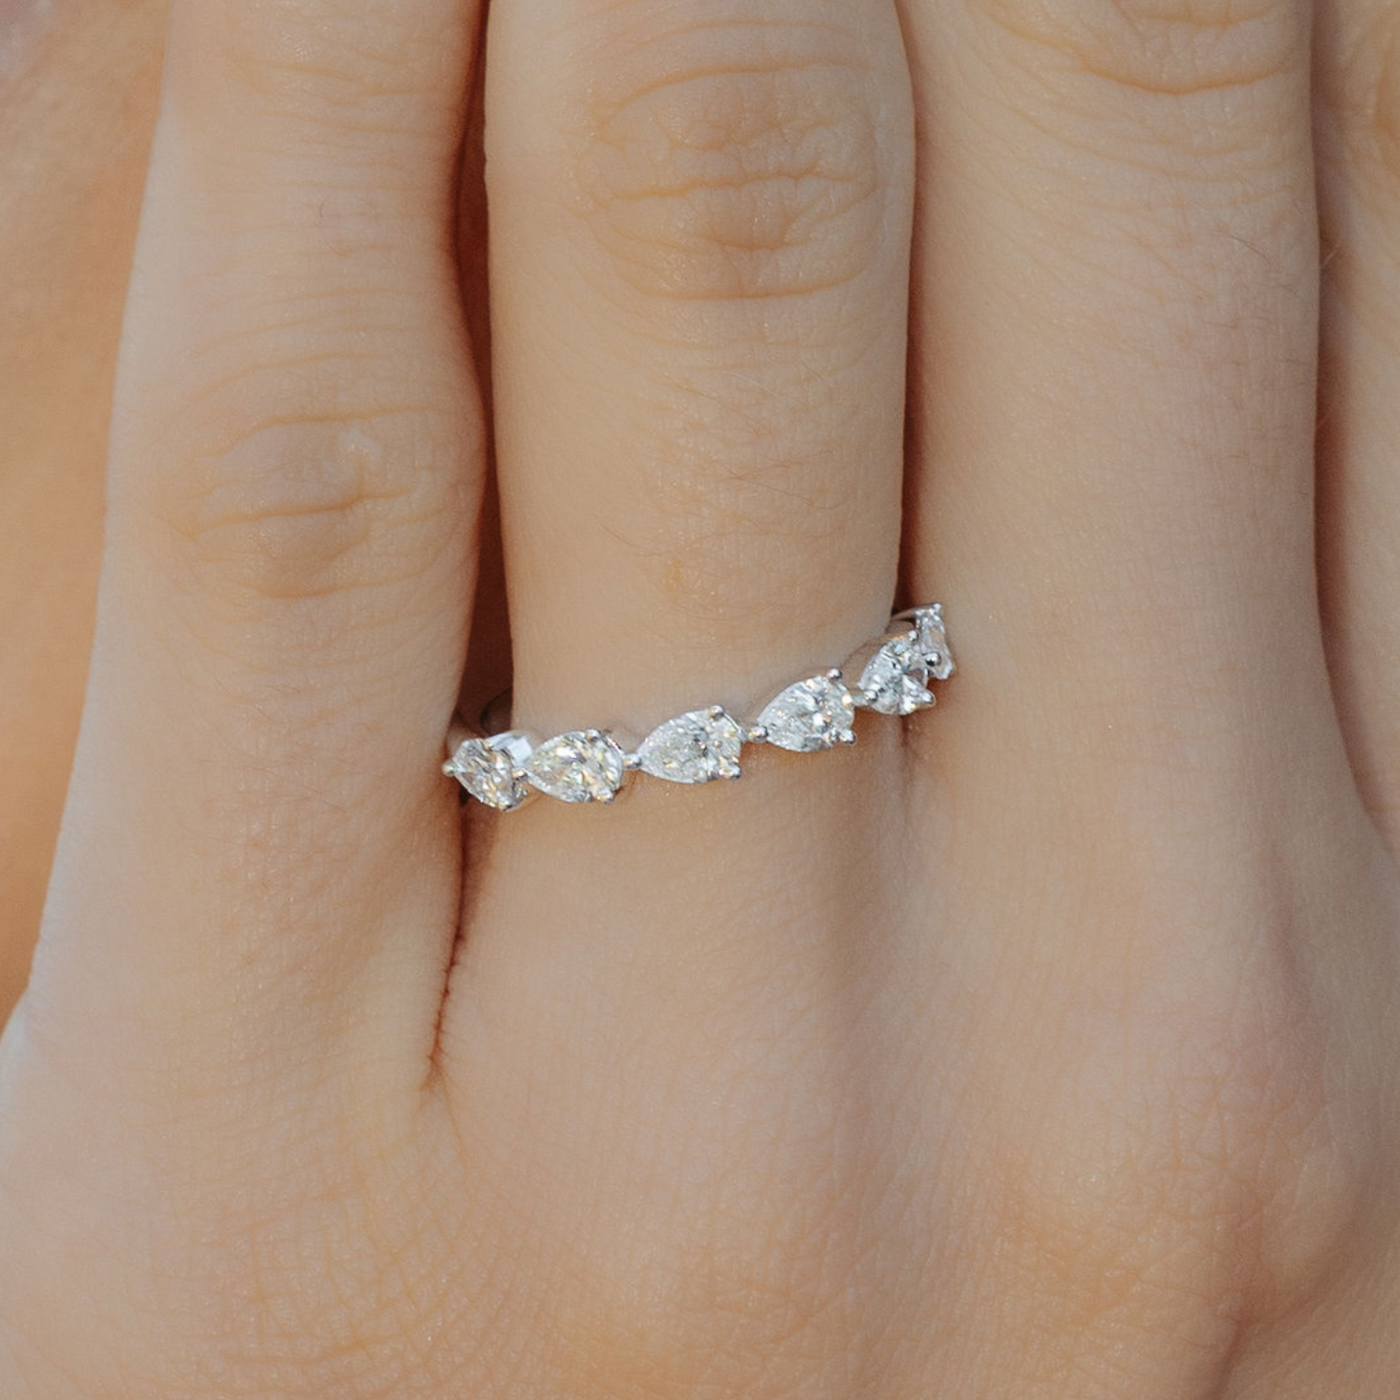 East-West Pear Shaped Diamond Ring